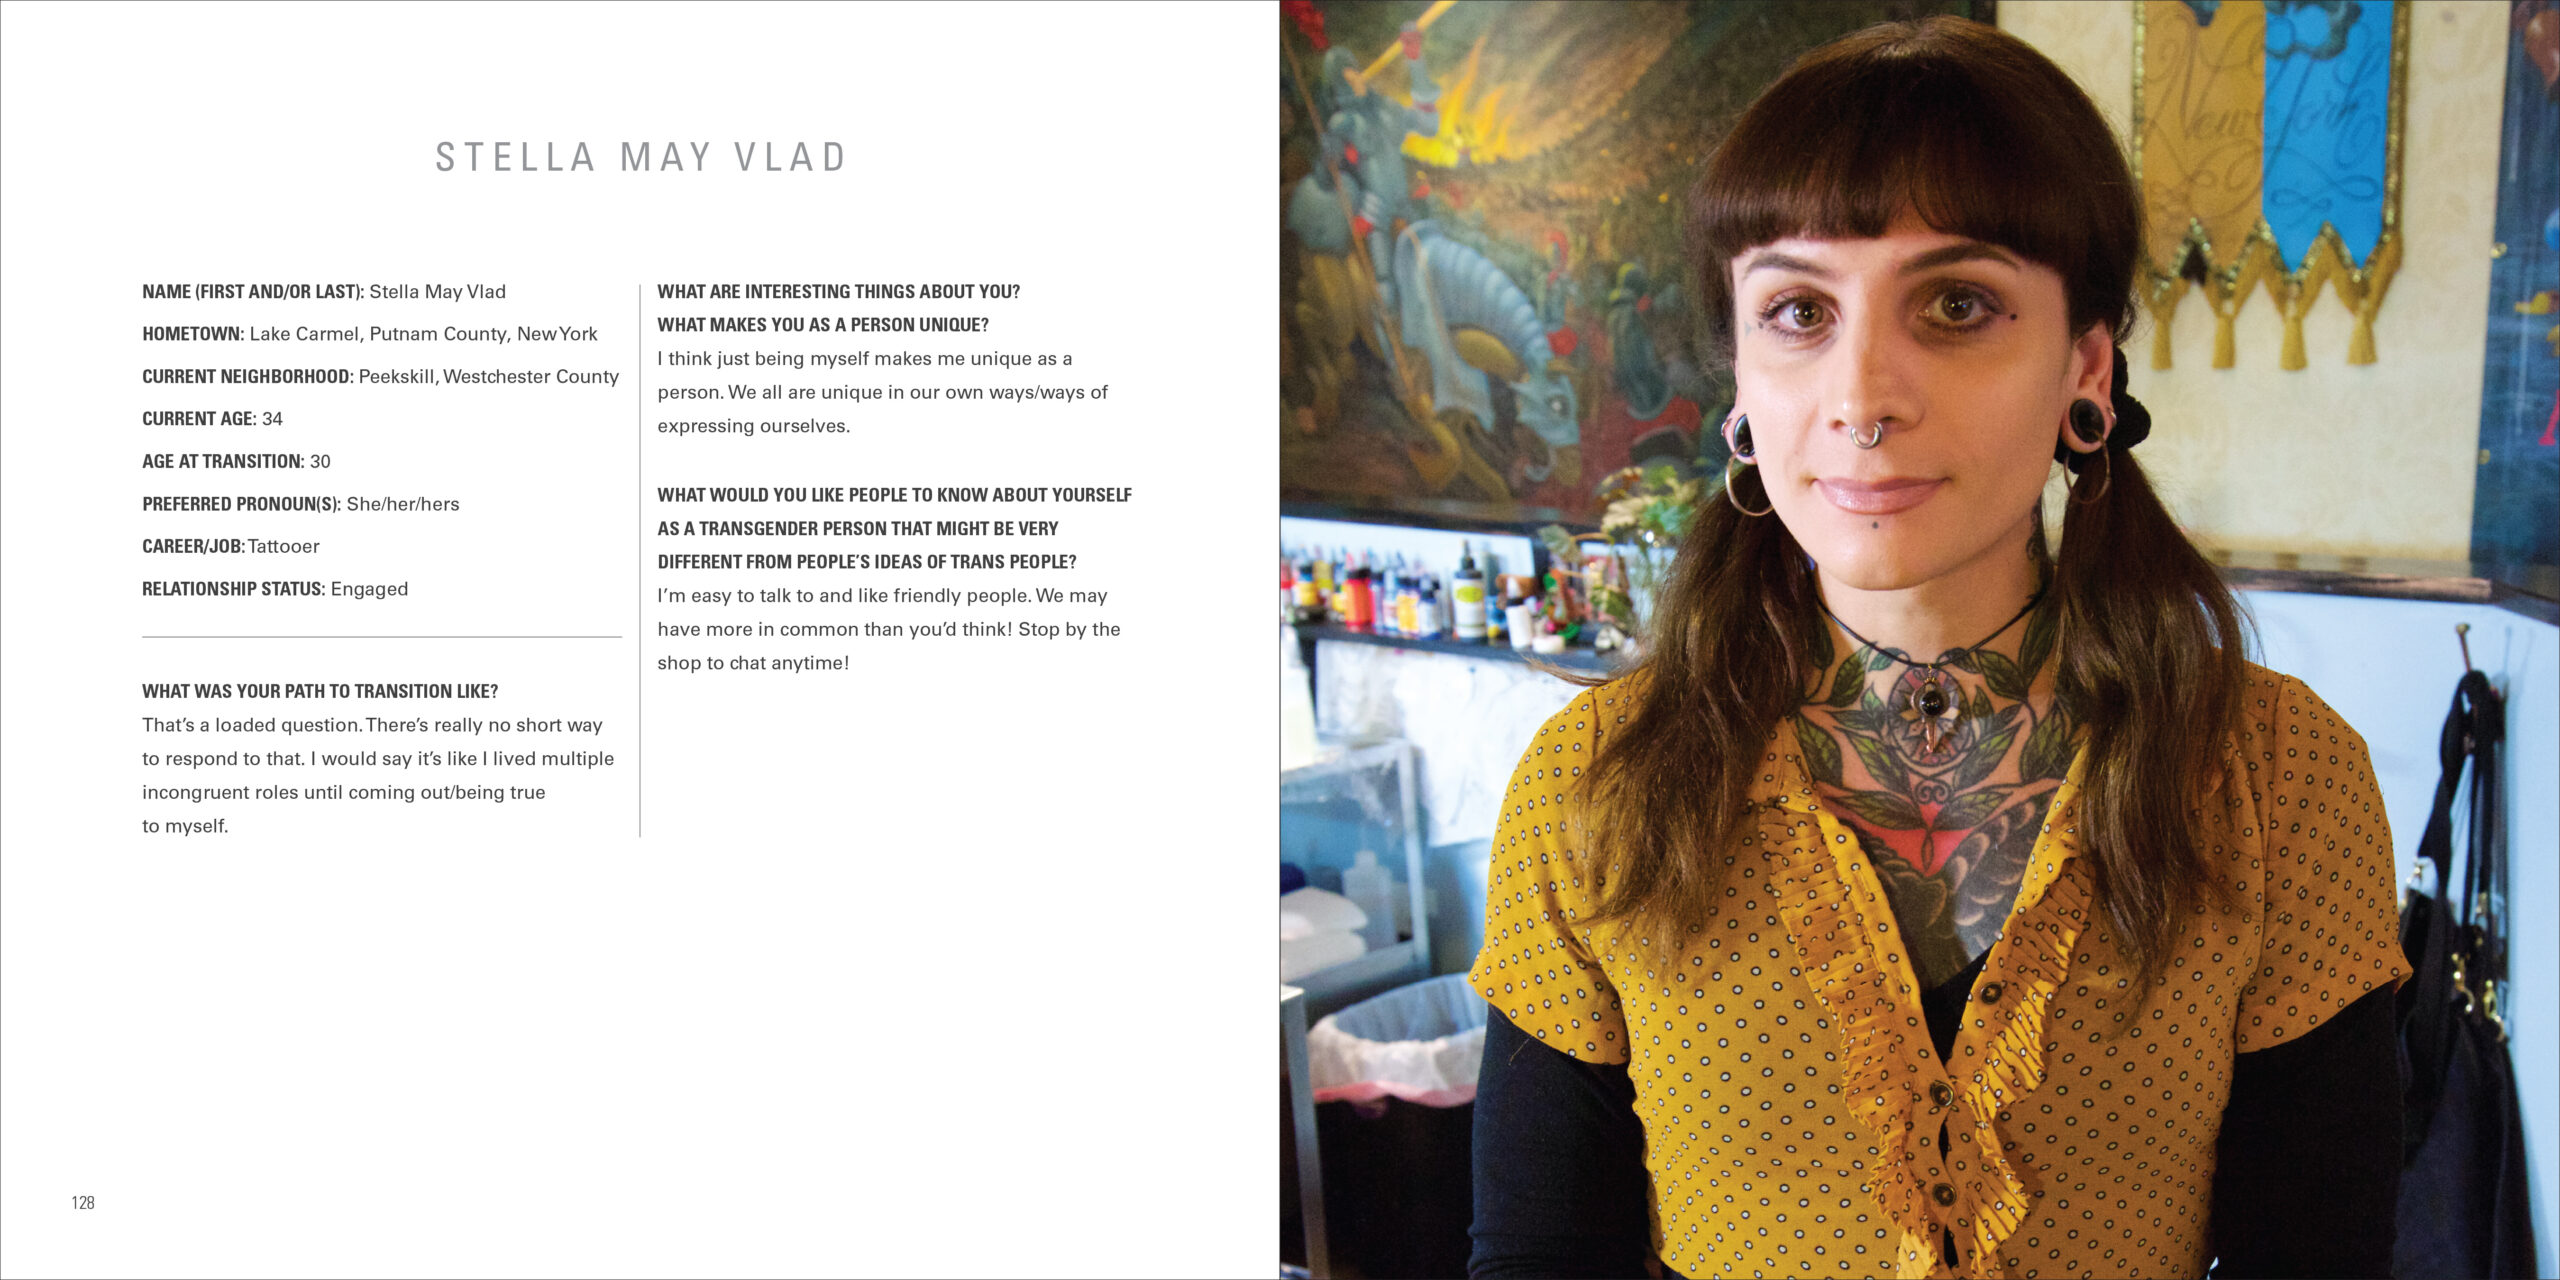 A photograph and interview with Stella May Vlad featured in Trans New York by Peter Bussian (Photo Credit: Apollo Publishers)